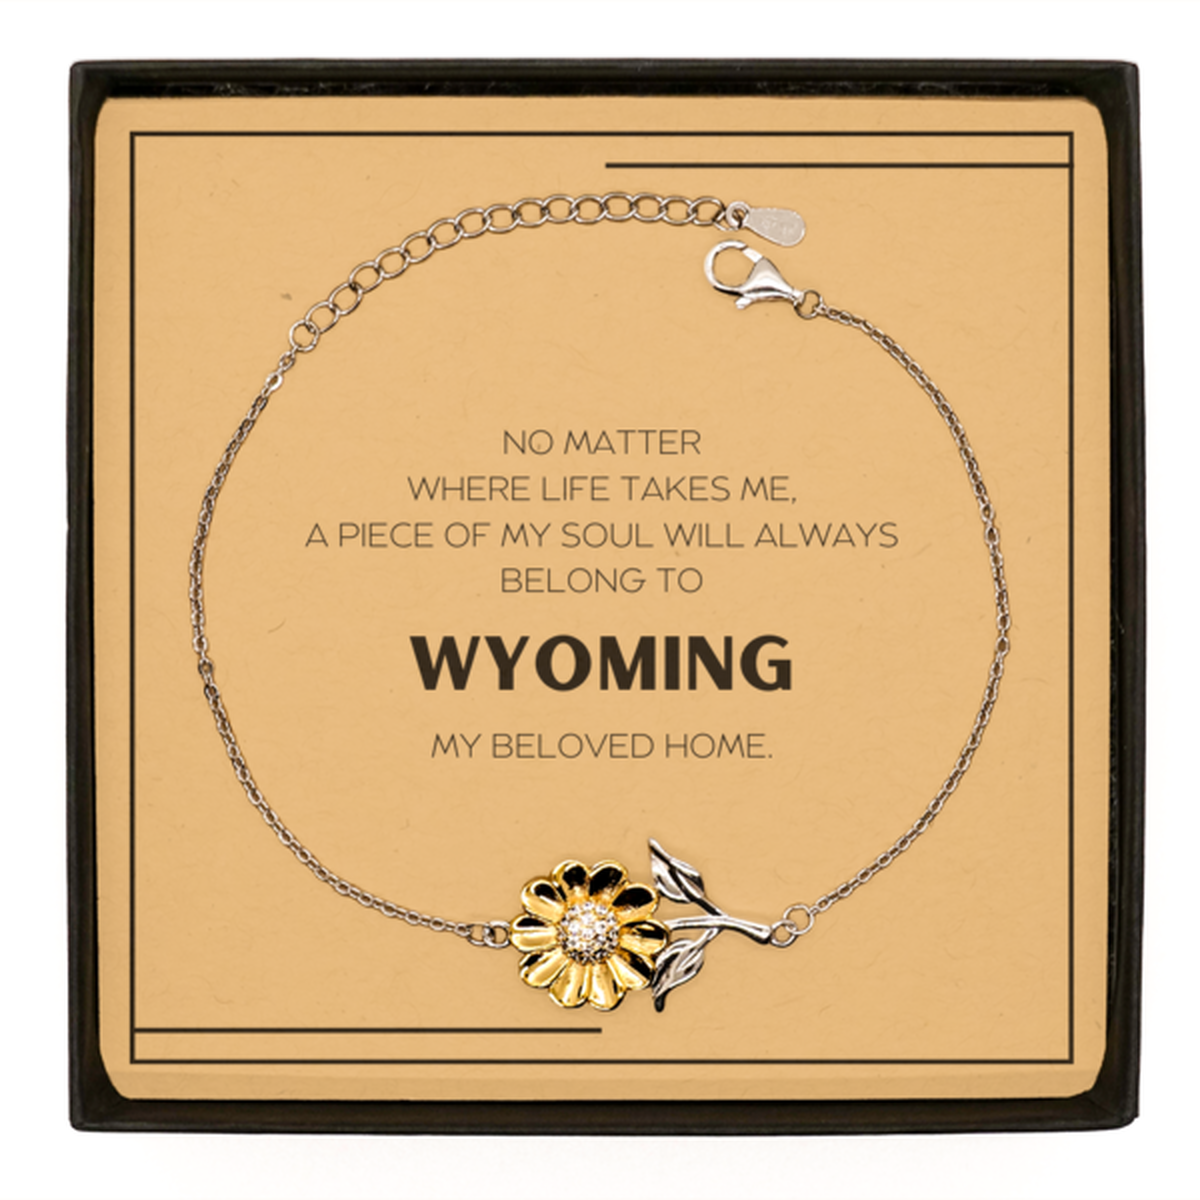 Love Wyoming State Gifts, My soul will always belong to Wyoming, Proud Sunflower Bracelet, Birthday Unique Gifts For Wyoming Men, Women, Friends